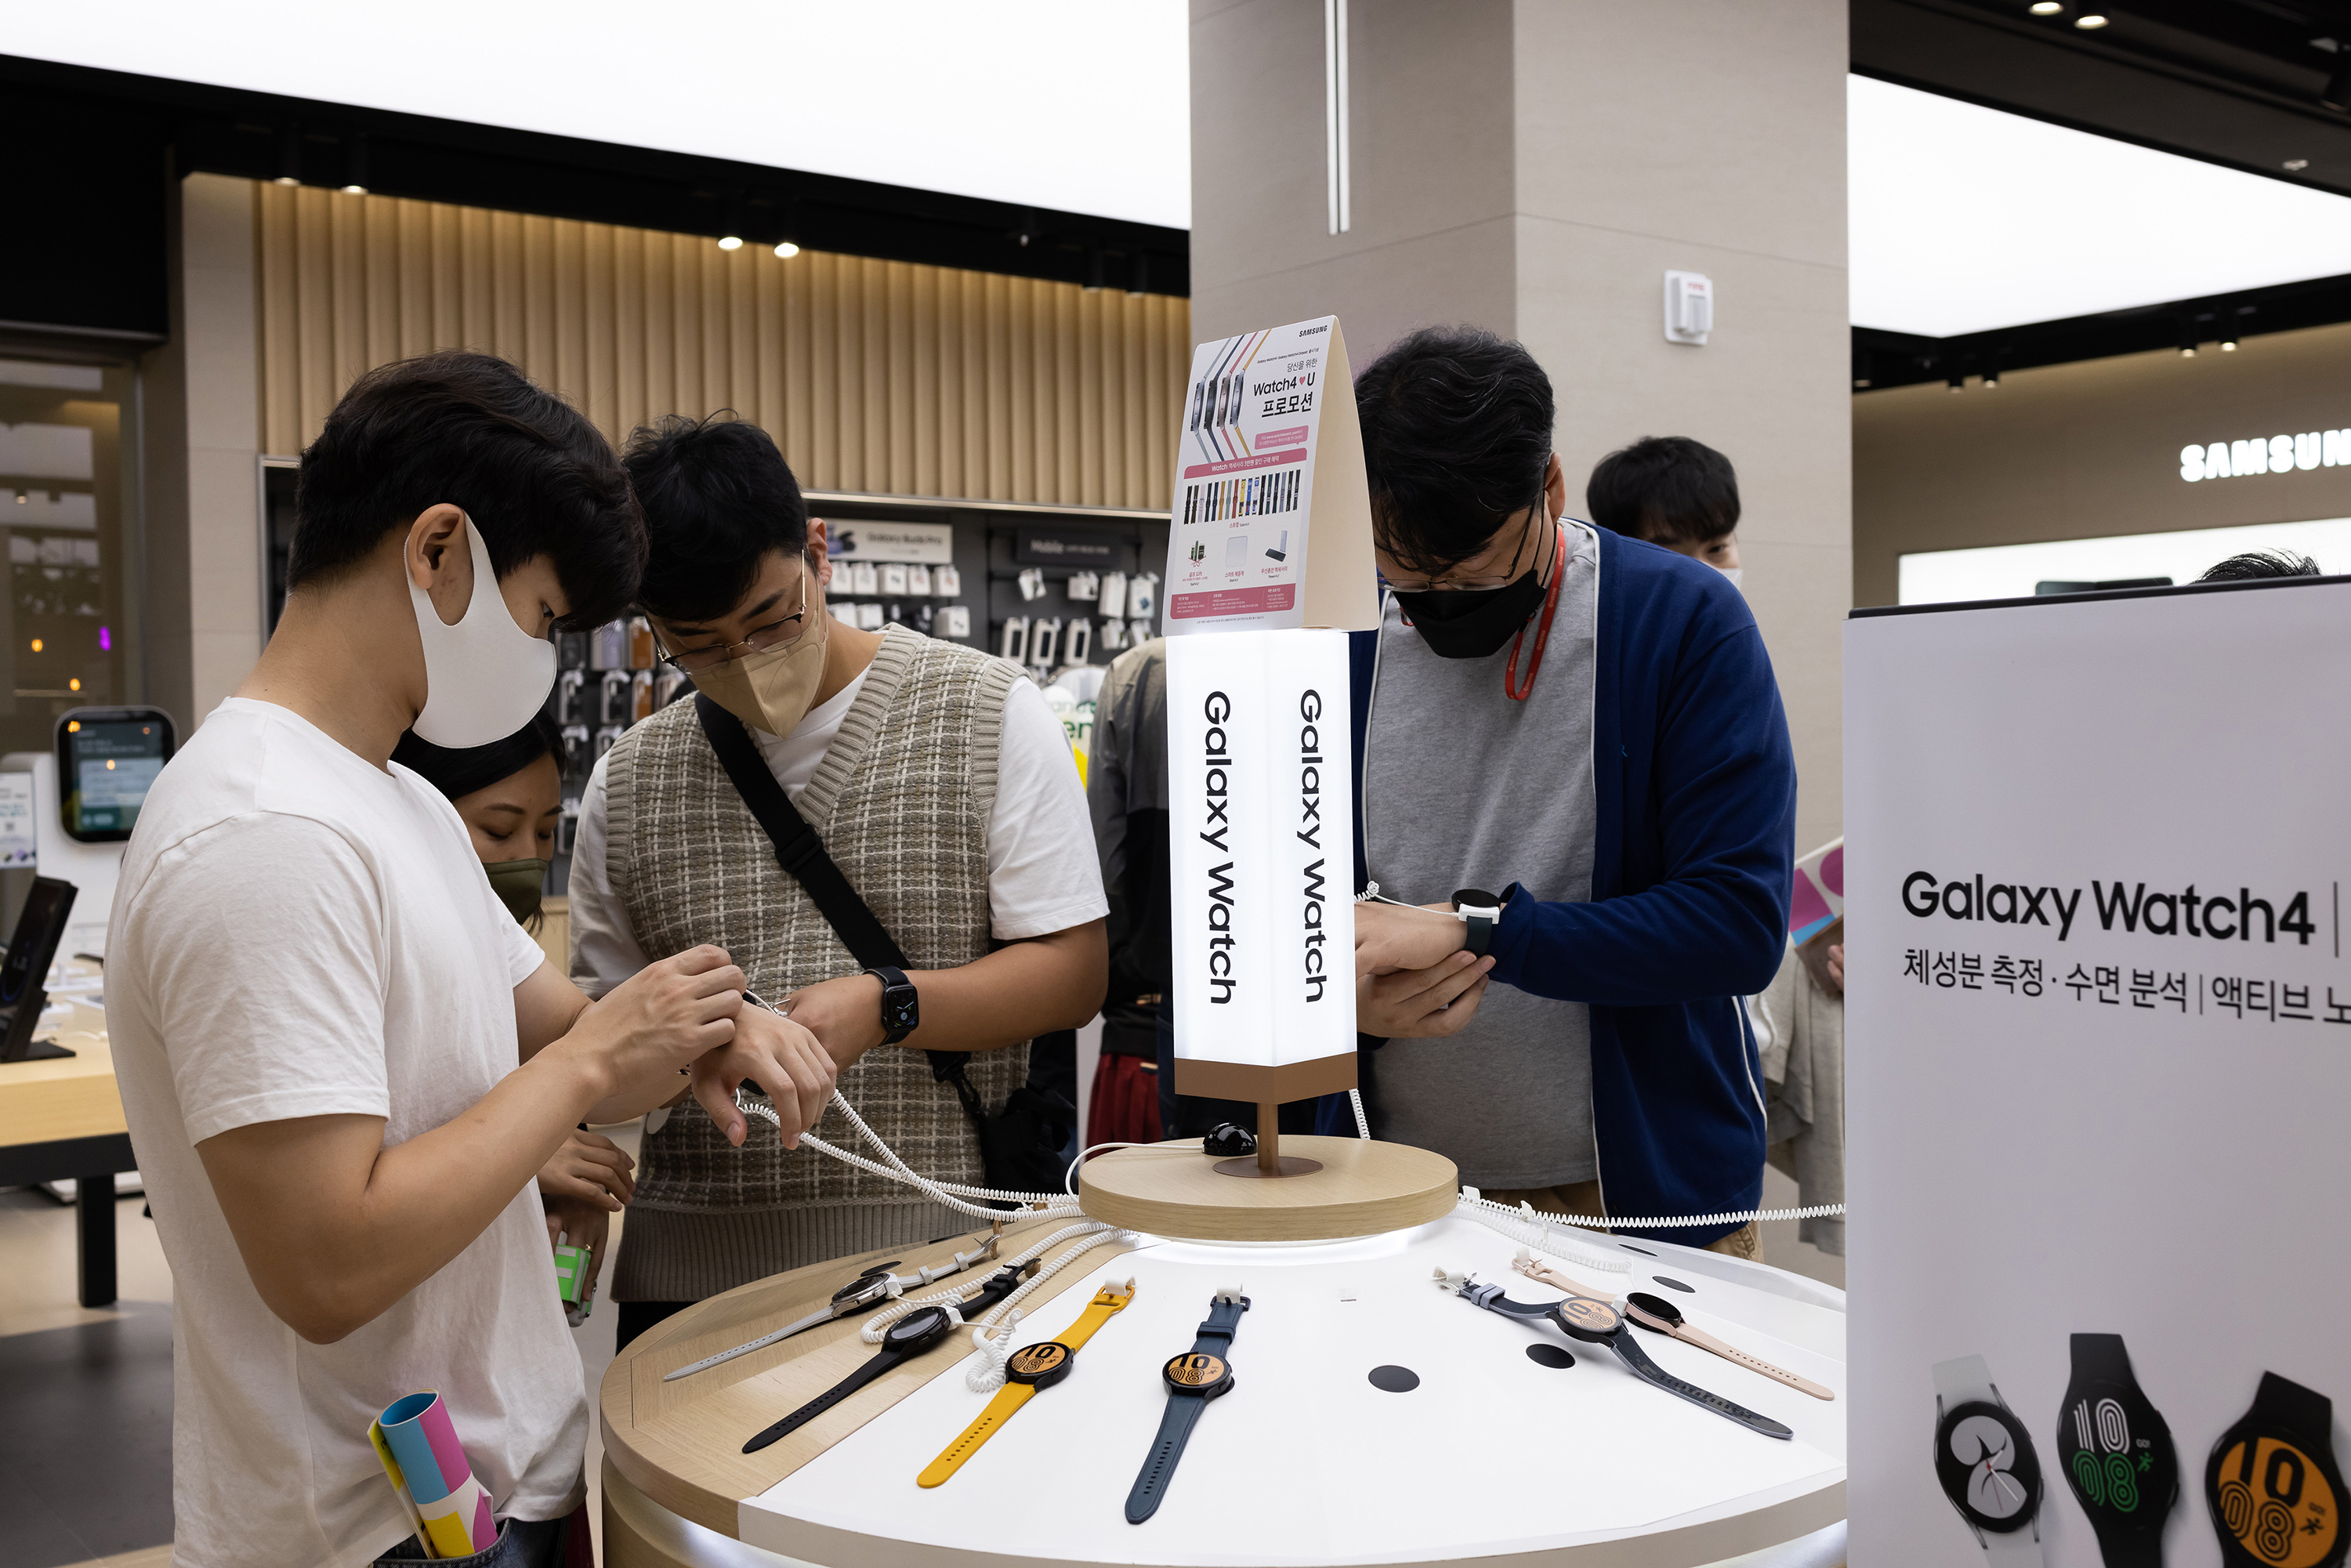 Customers try out Samsung smartwatches at the store in Seoul, South Korea, on October 3.